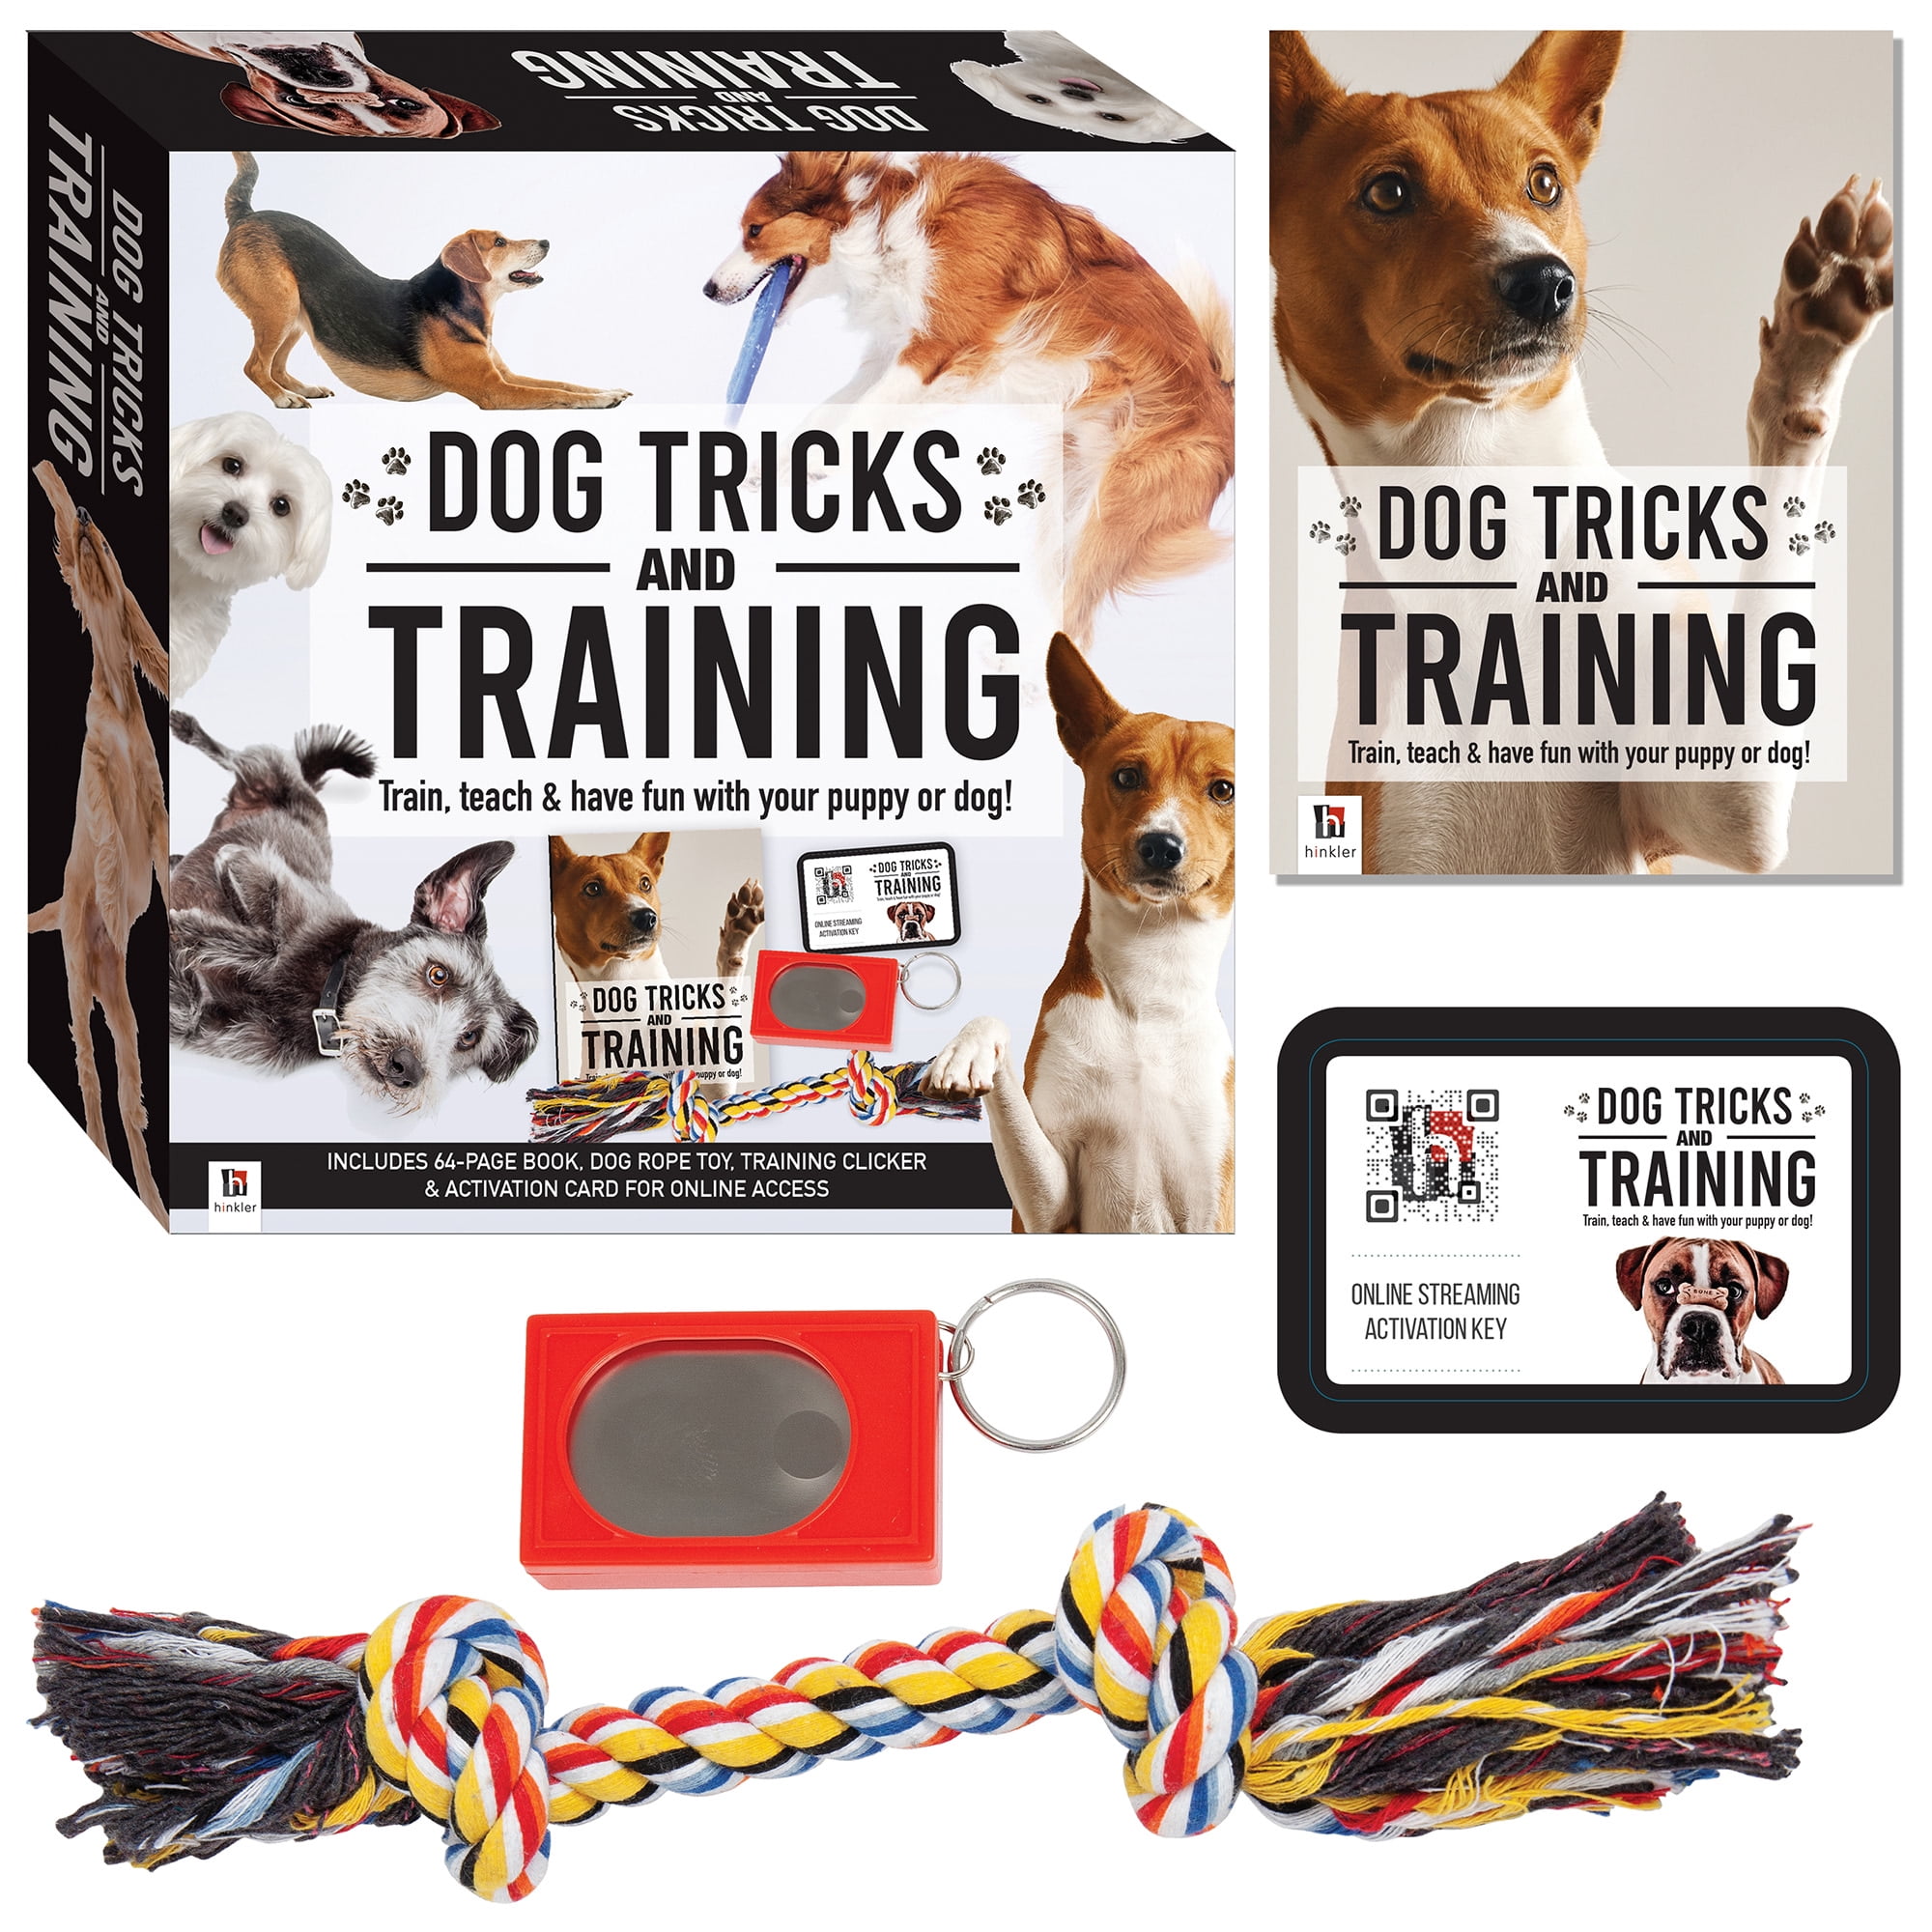 Mind Body & Bowl - *** MBB Bargain Buys *** Kmart in the spotlight again  with their Training Treat Dispenser which looks EXACTLY like the Gigwi Pet  Droid Hide & Seek Trainer/Trixie